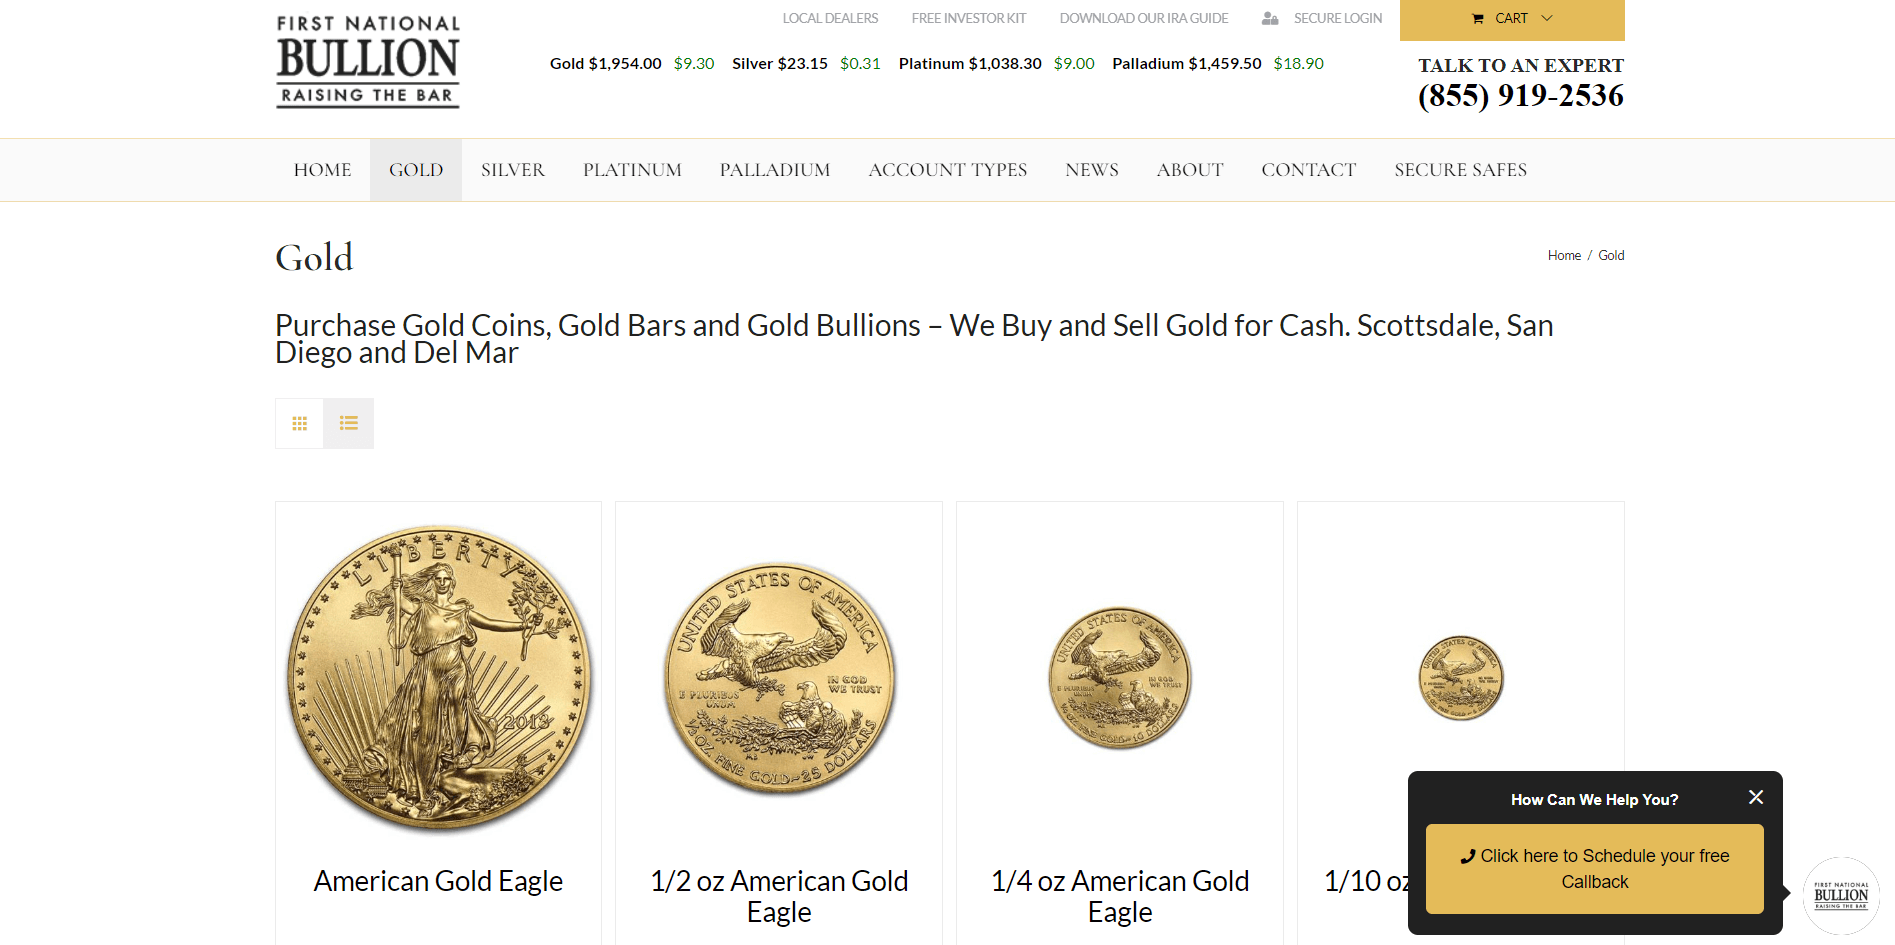 first national bullion gold ira review products and services